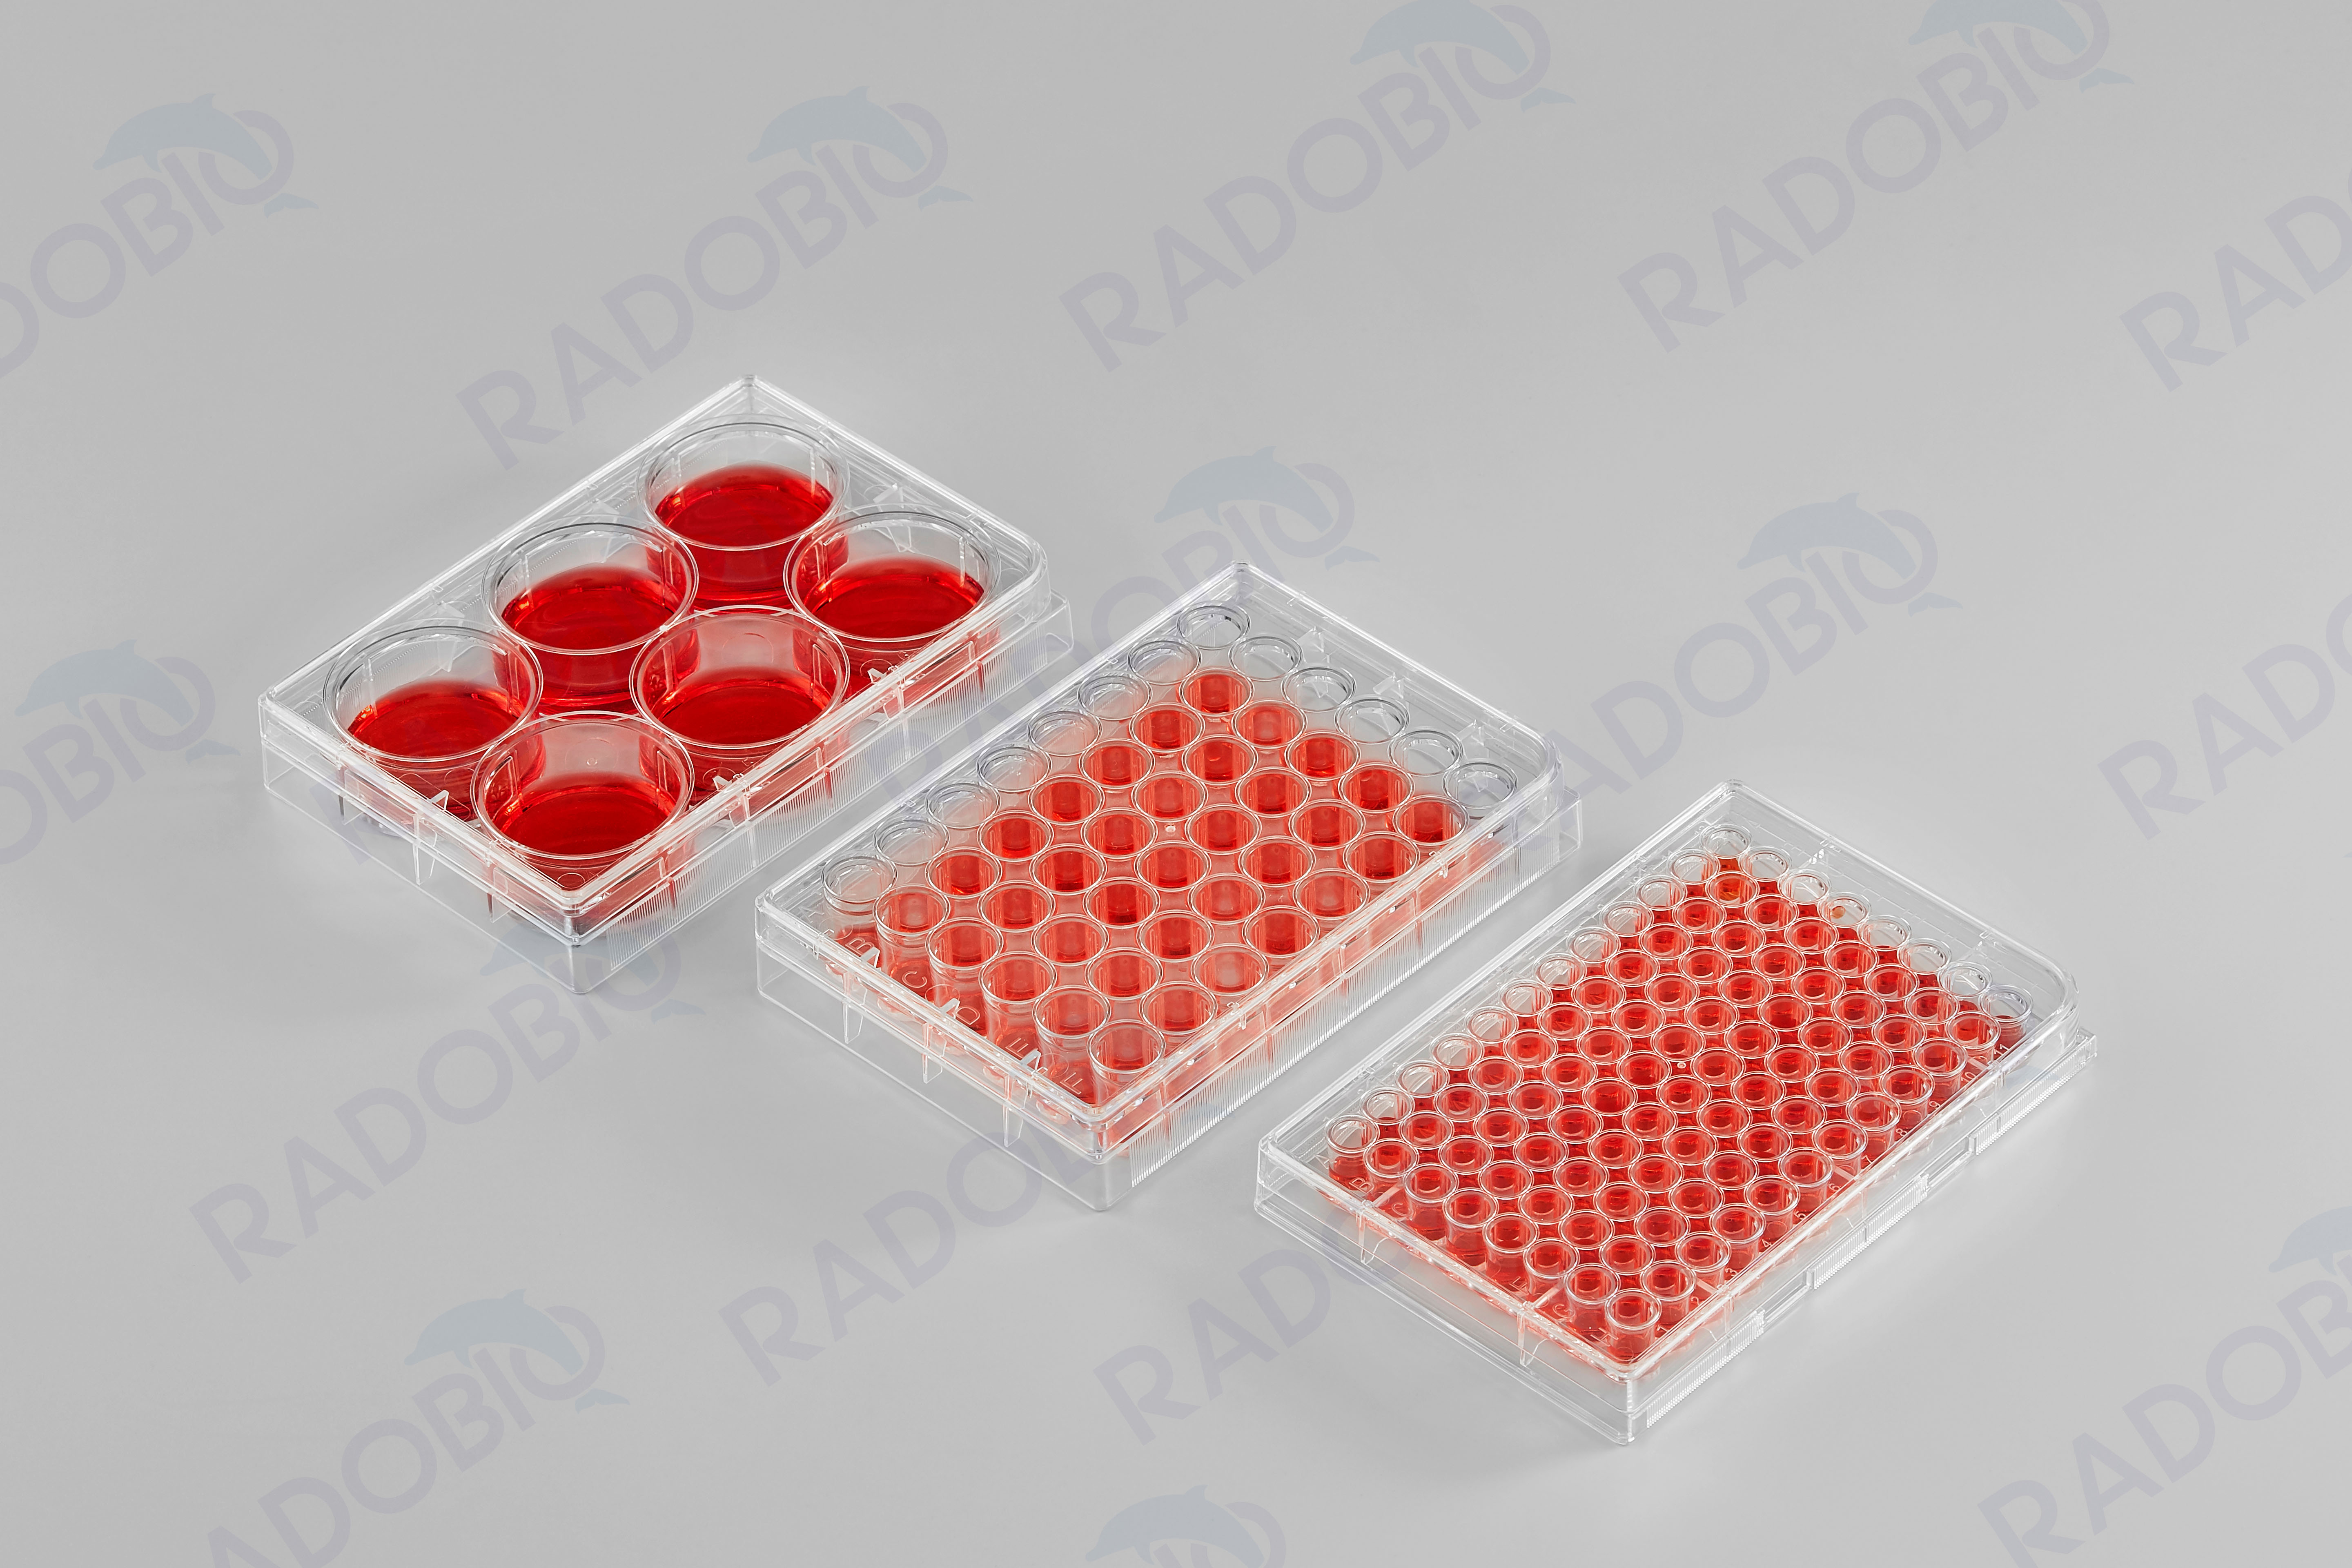 Cell Culture Plate Featured Image